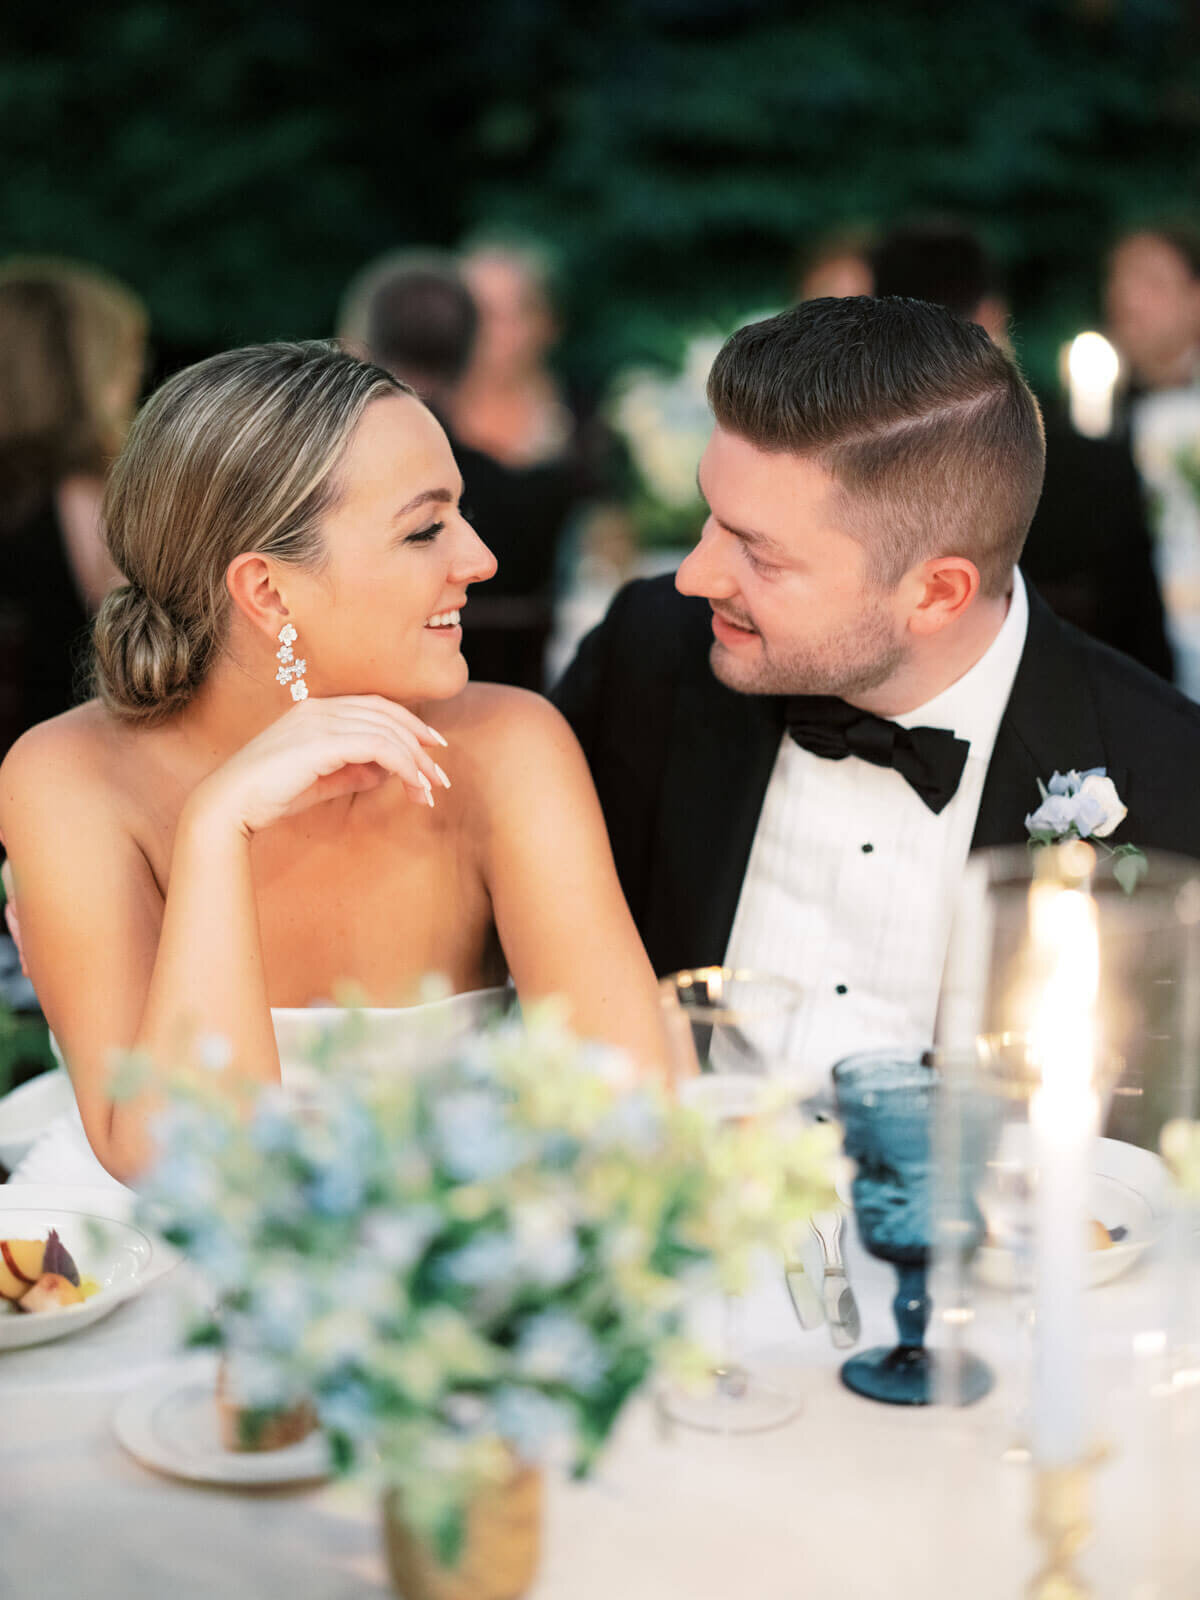 The bride and the groom are happily staring at each other while seated at the elegant wedding reception. Image by Jenny Fu Studio